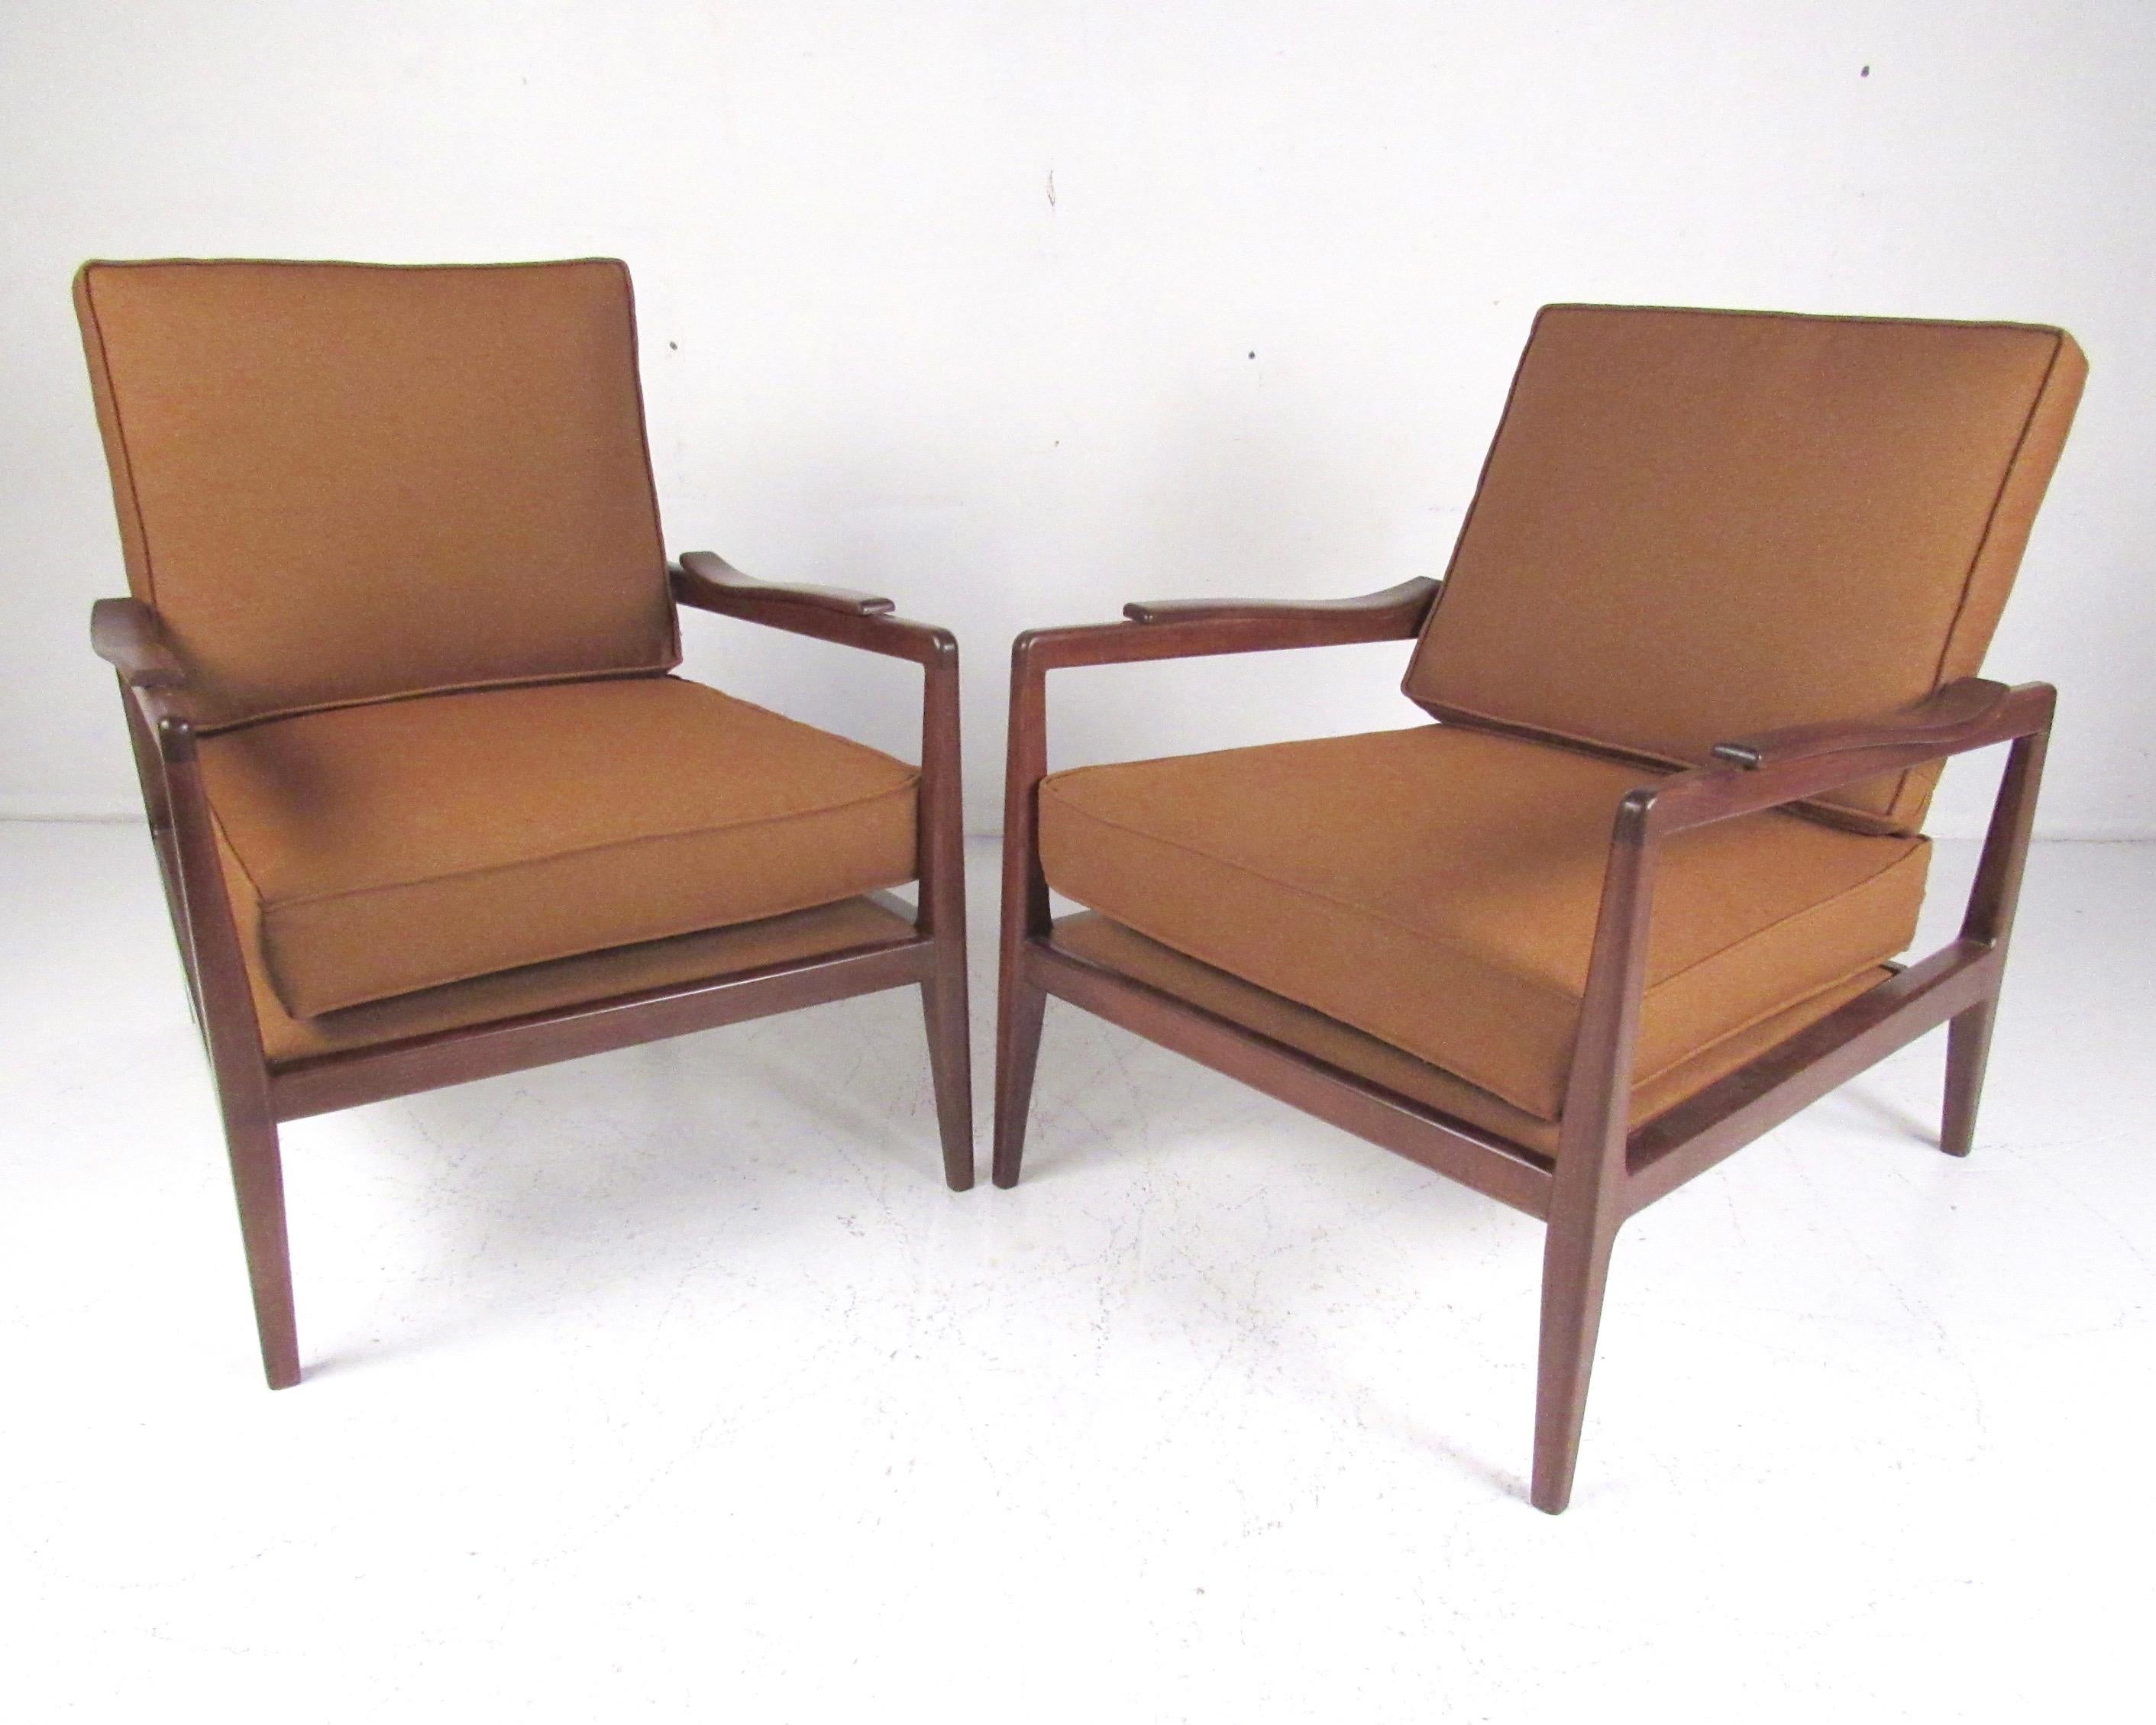 This striking pair of low profile vintage modern lounge chairs feature sculptural spindle seat backs, wide comfortable seats, and uniquely curved armrests. Designed by Edmond Spence for Urban-Aire. The impressive Mid-Century Modern design of this